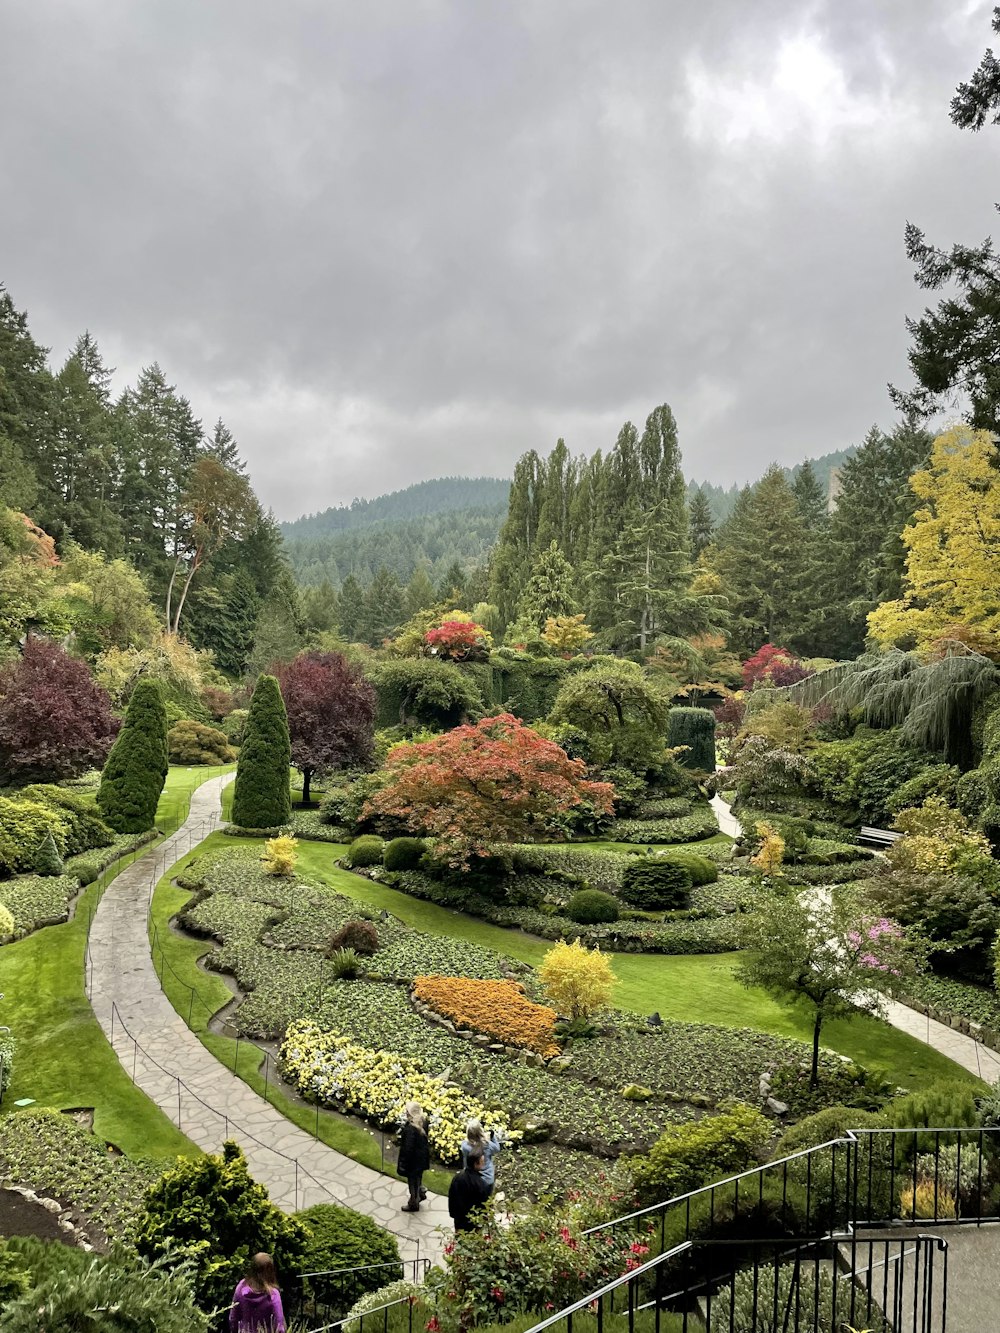 a view of a garden with a winding path